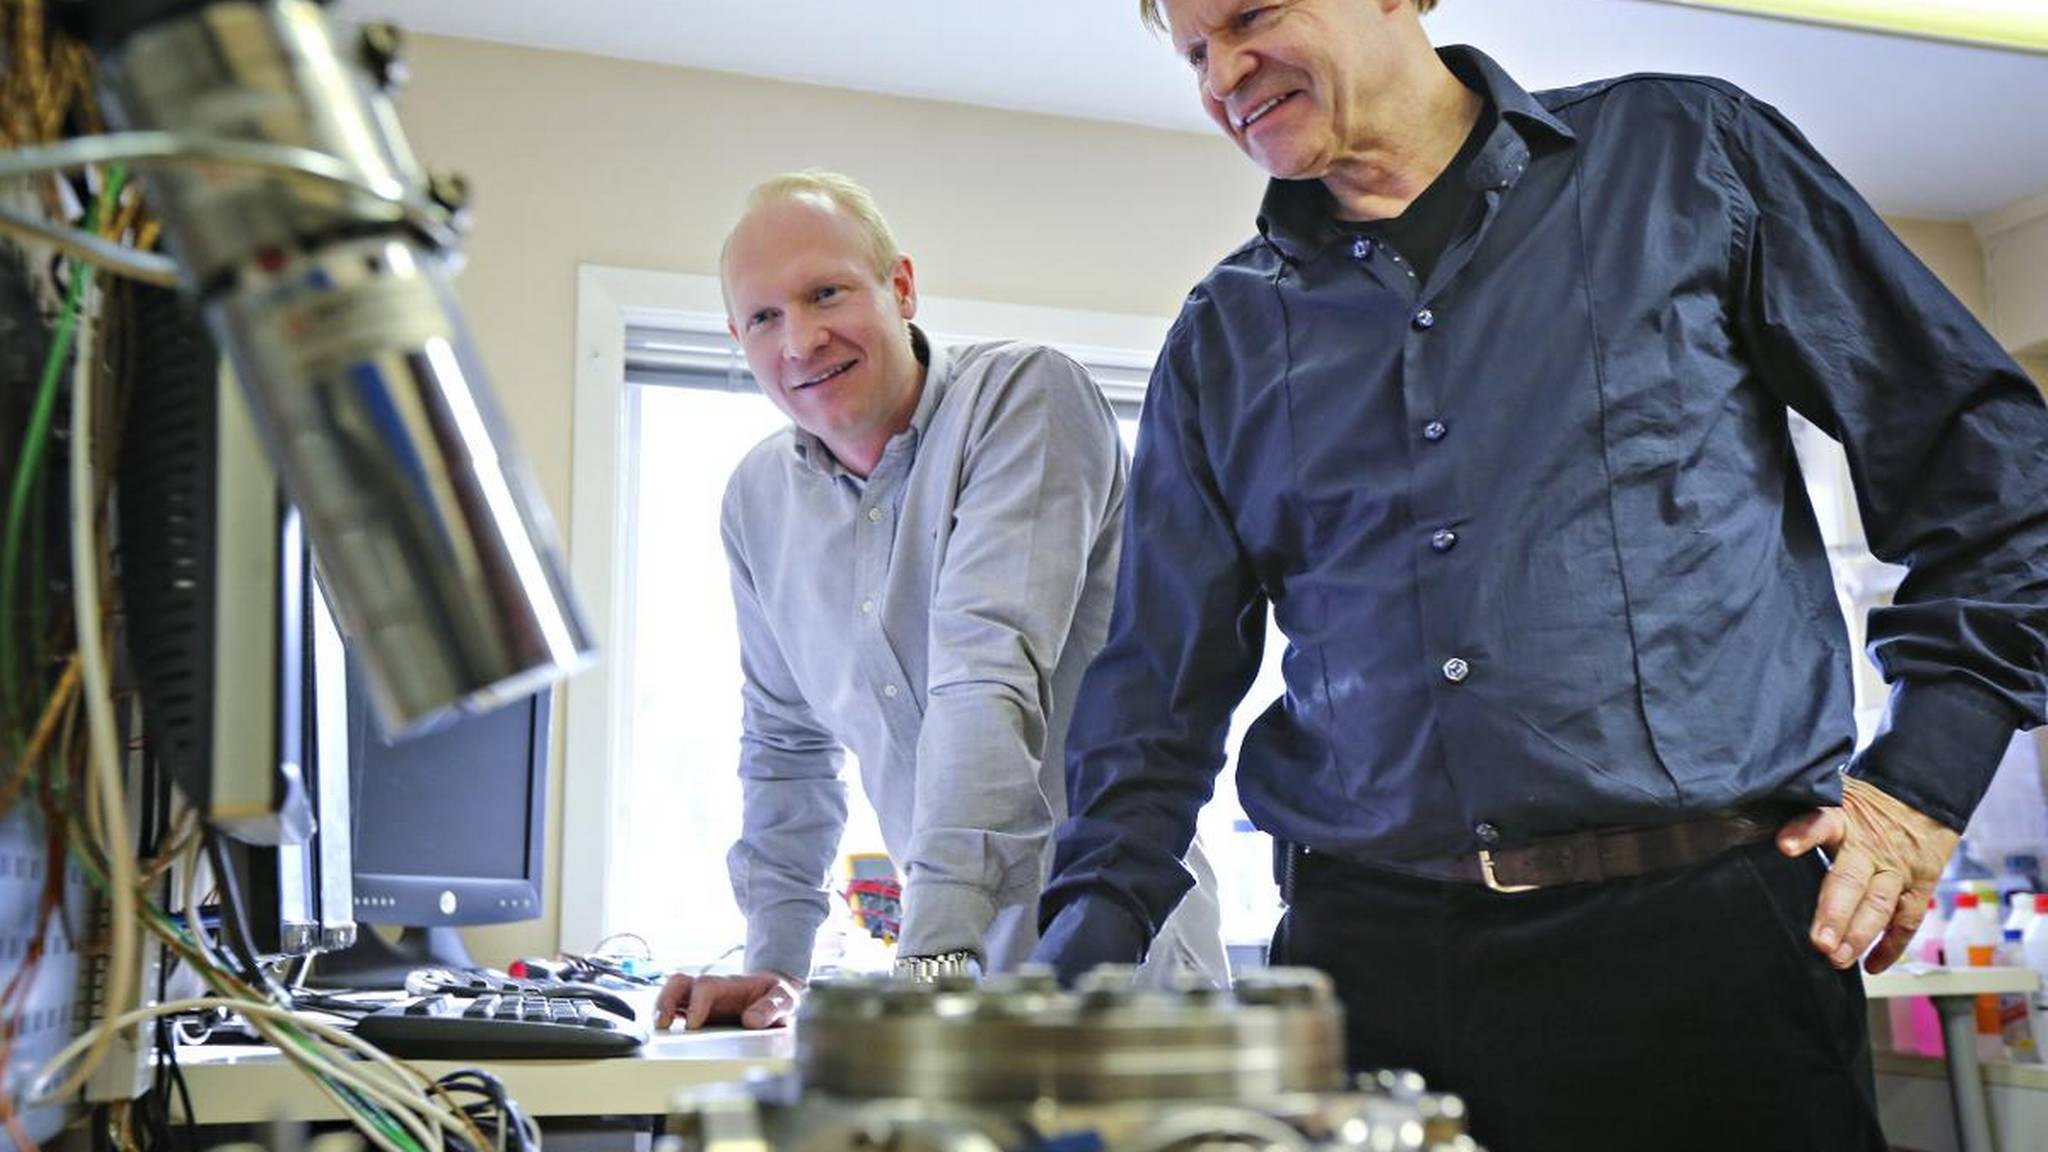 Father and Son cold fusion moves into mainstream Norwegian industry.